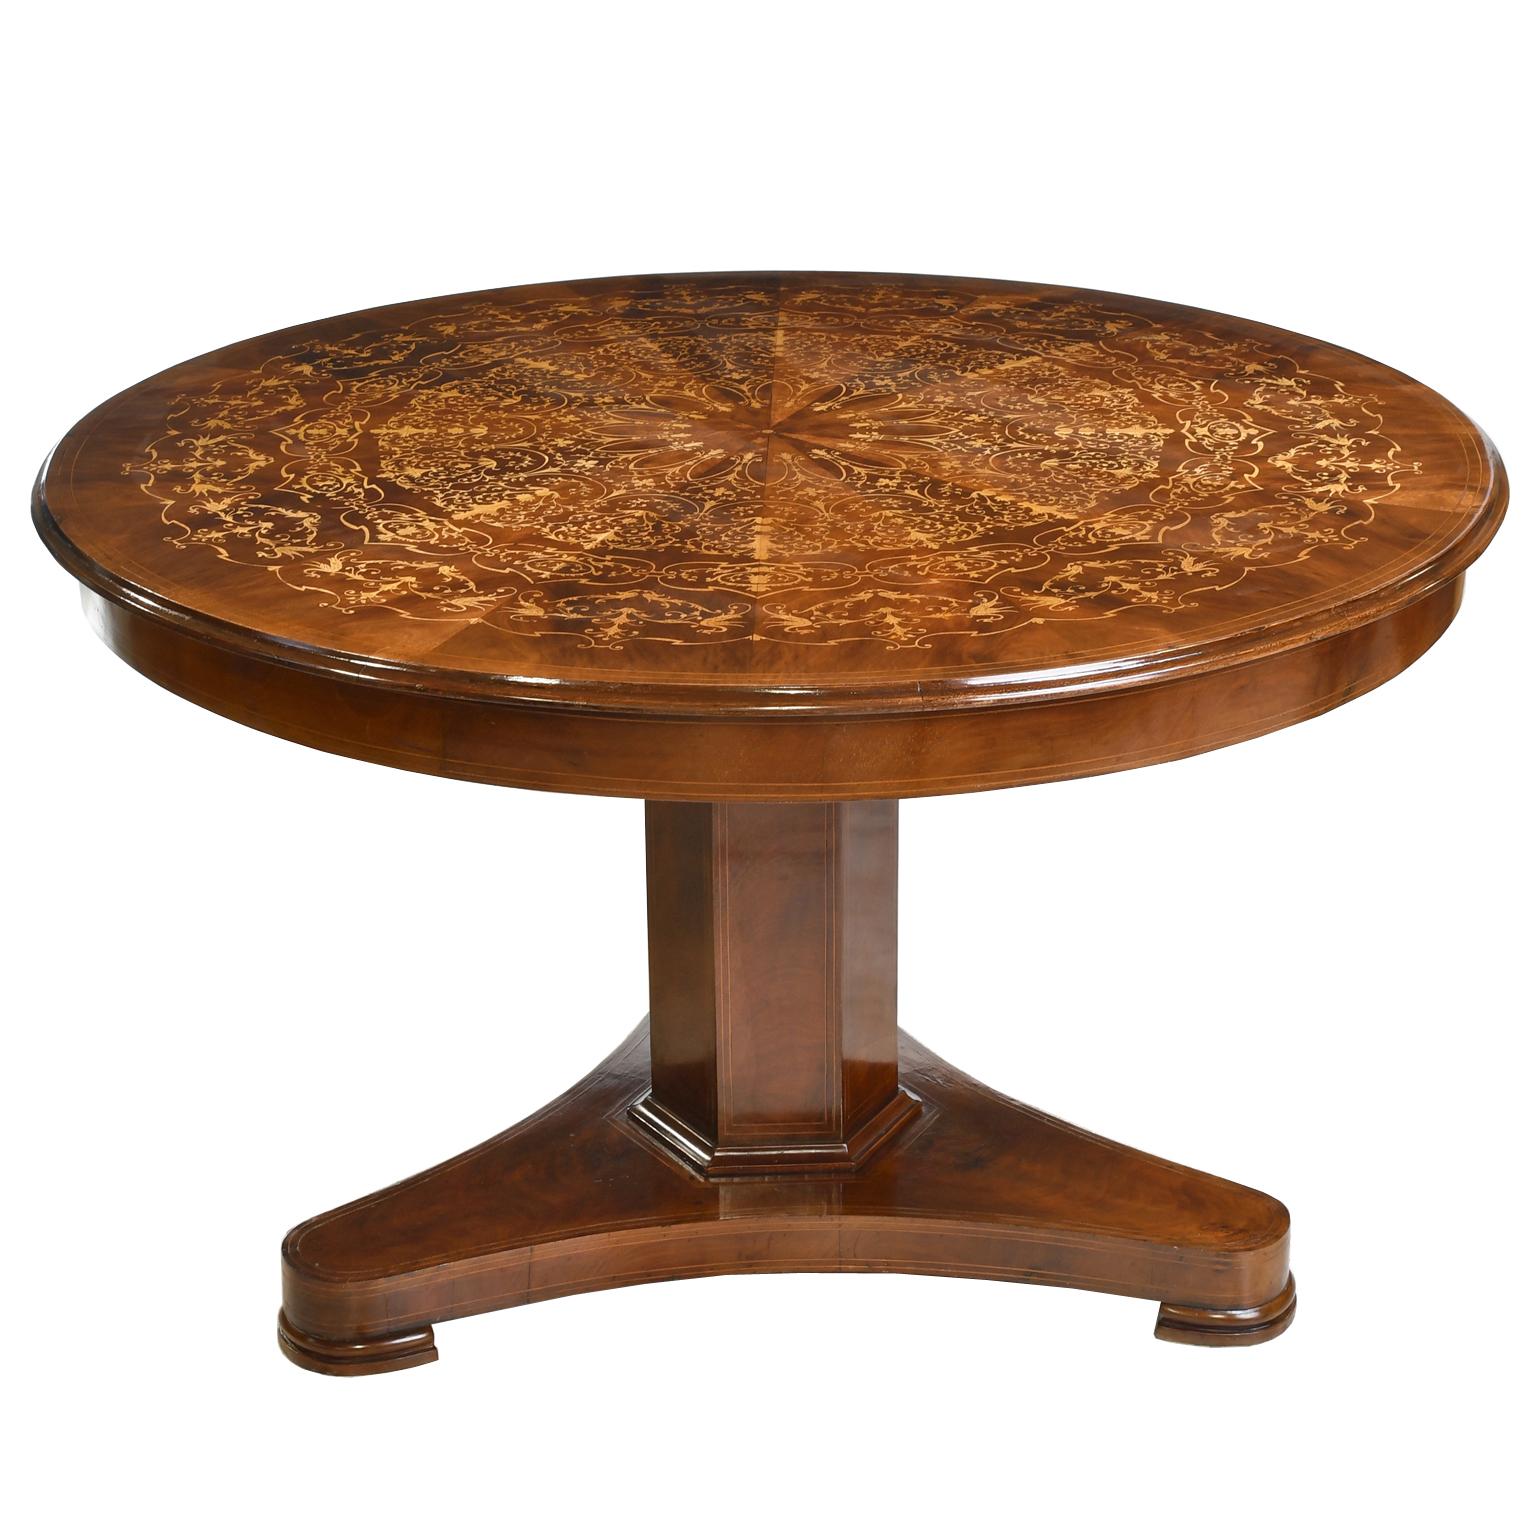 An exceptional tilt-top English Regency loo table or center table in fine West Indies mahogany with round top embellished with fine marquetry inlays in mahogany & satinwood. Tilt-top rests on hexagonal column with fine line inlays in satinwood over